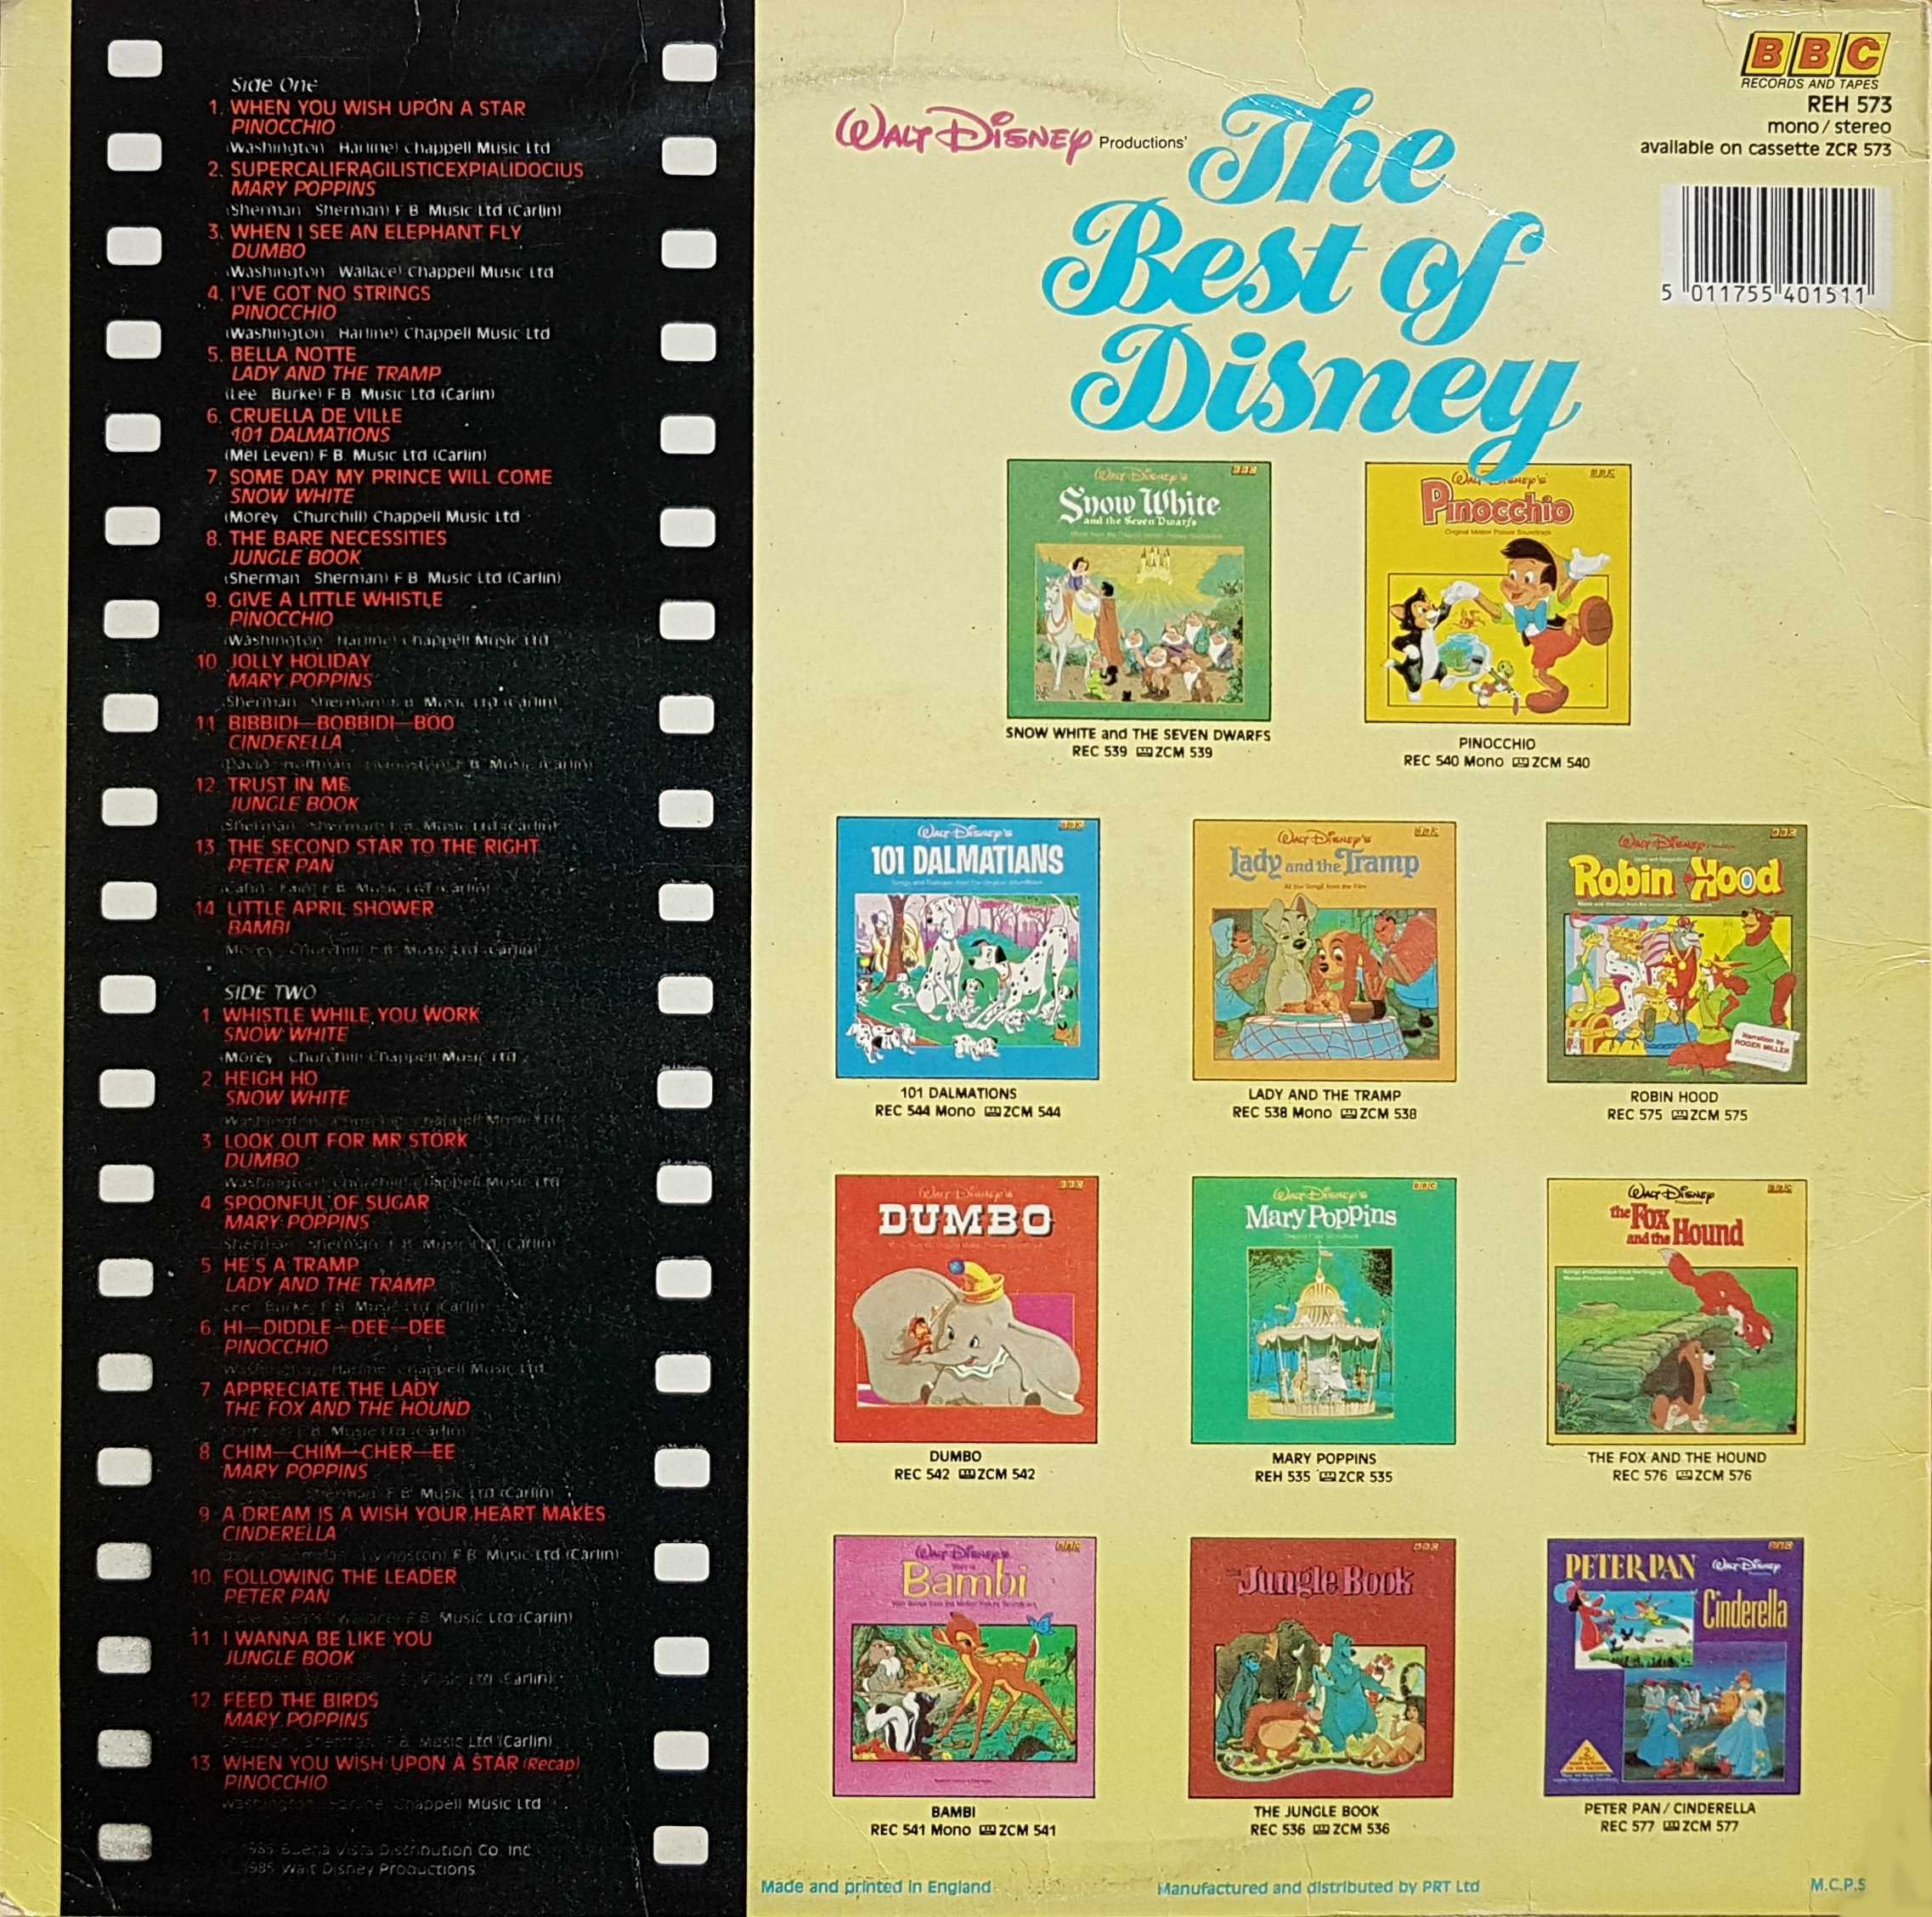 Picture of REH 573 The best of Disney by artist Various from the BBC records and Tapes library